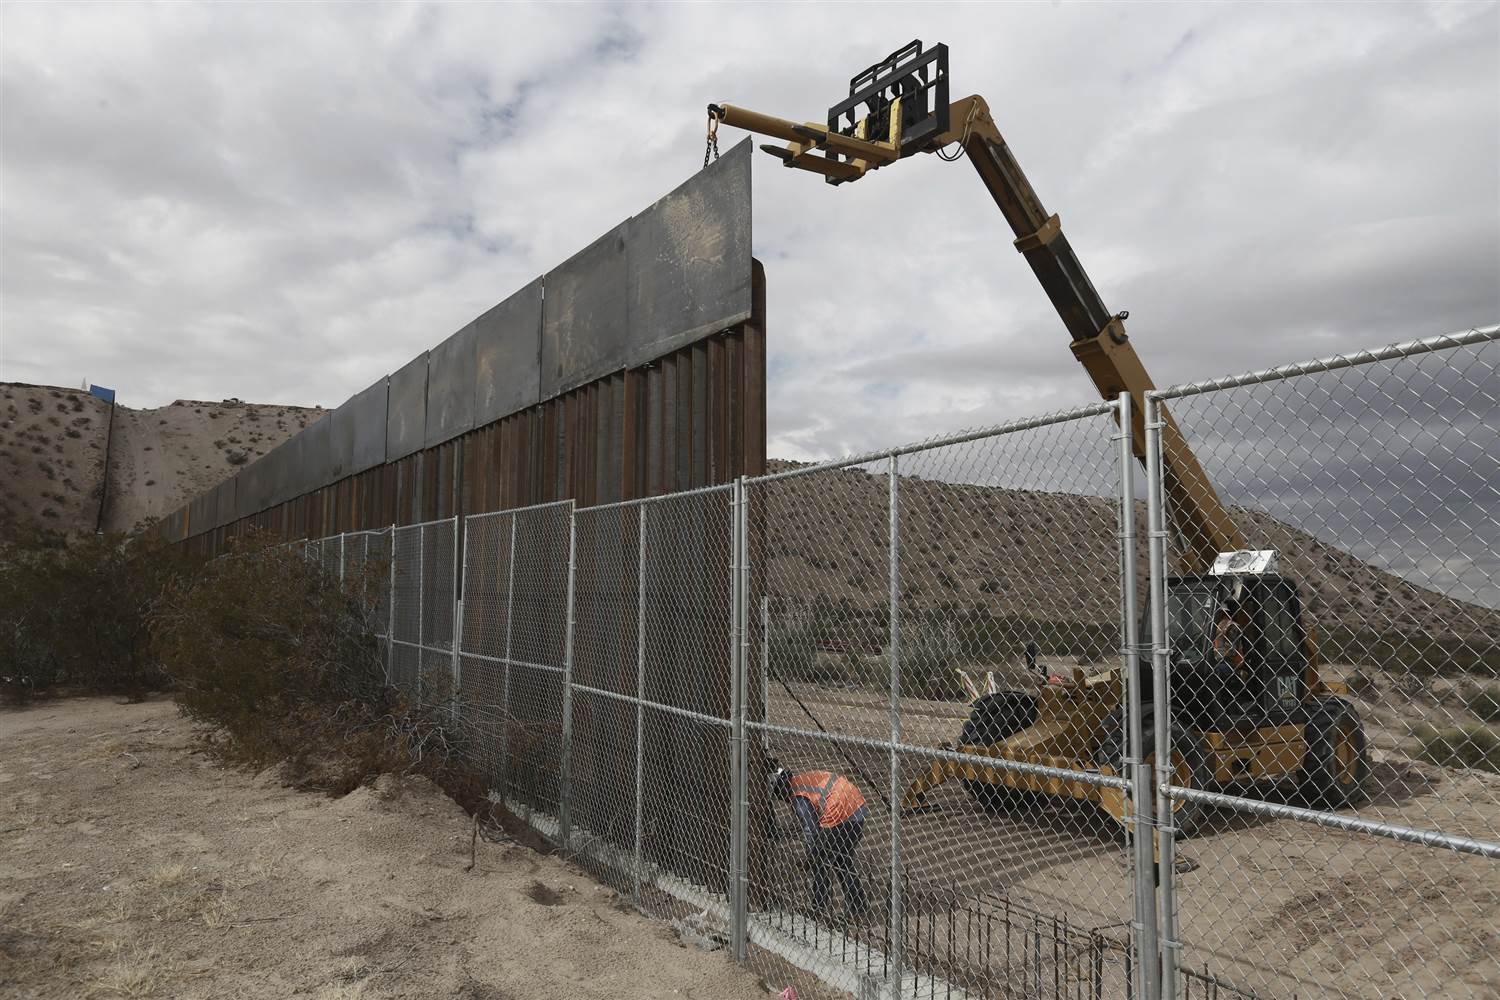 Mexico archdiocese says work on Trump wall is treason